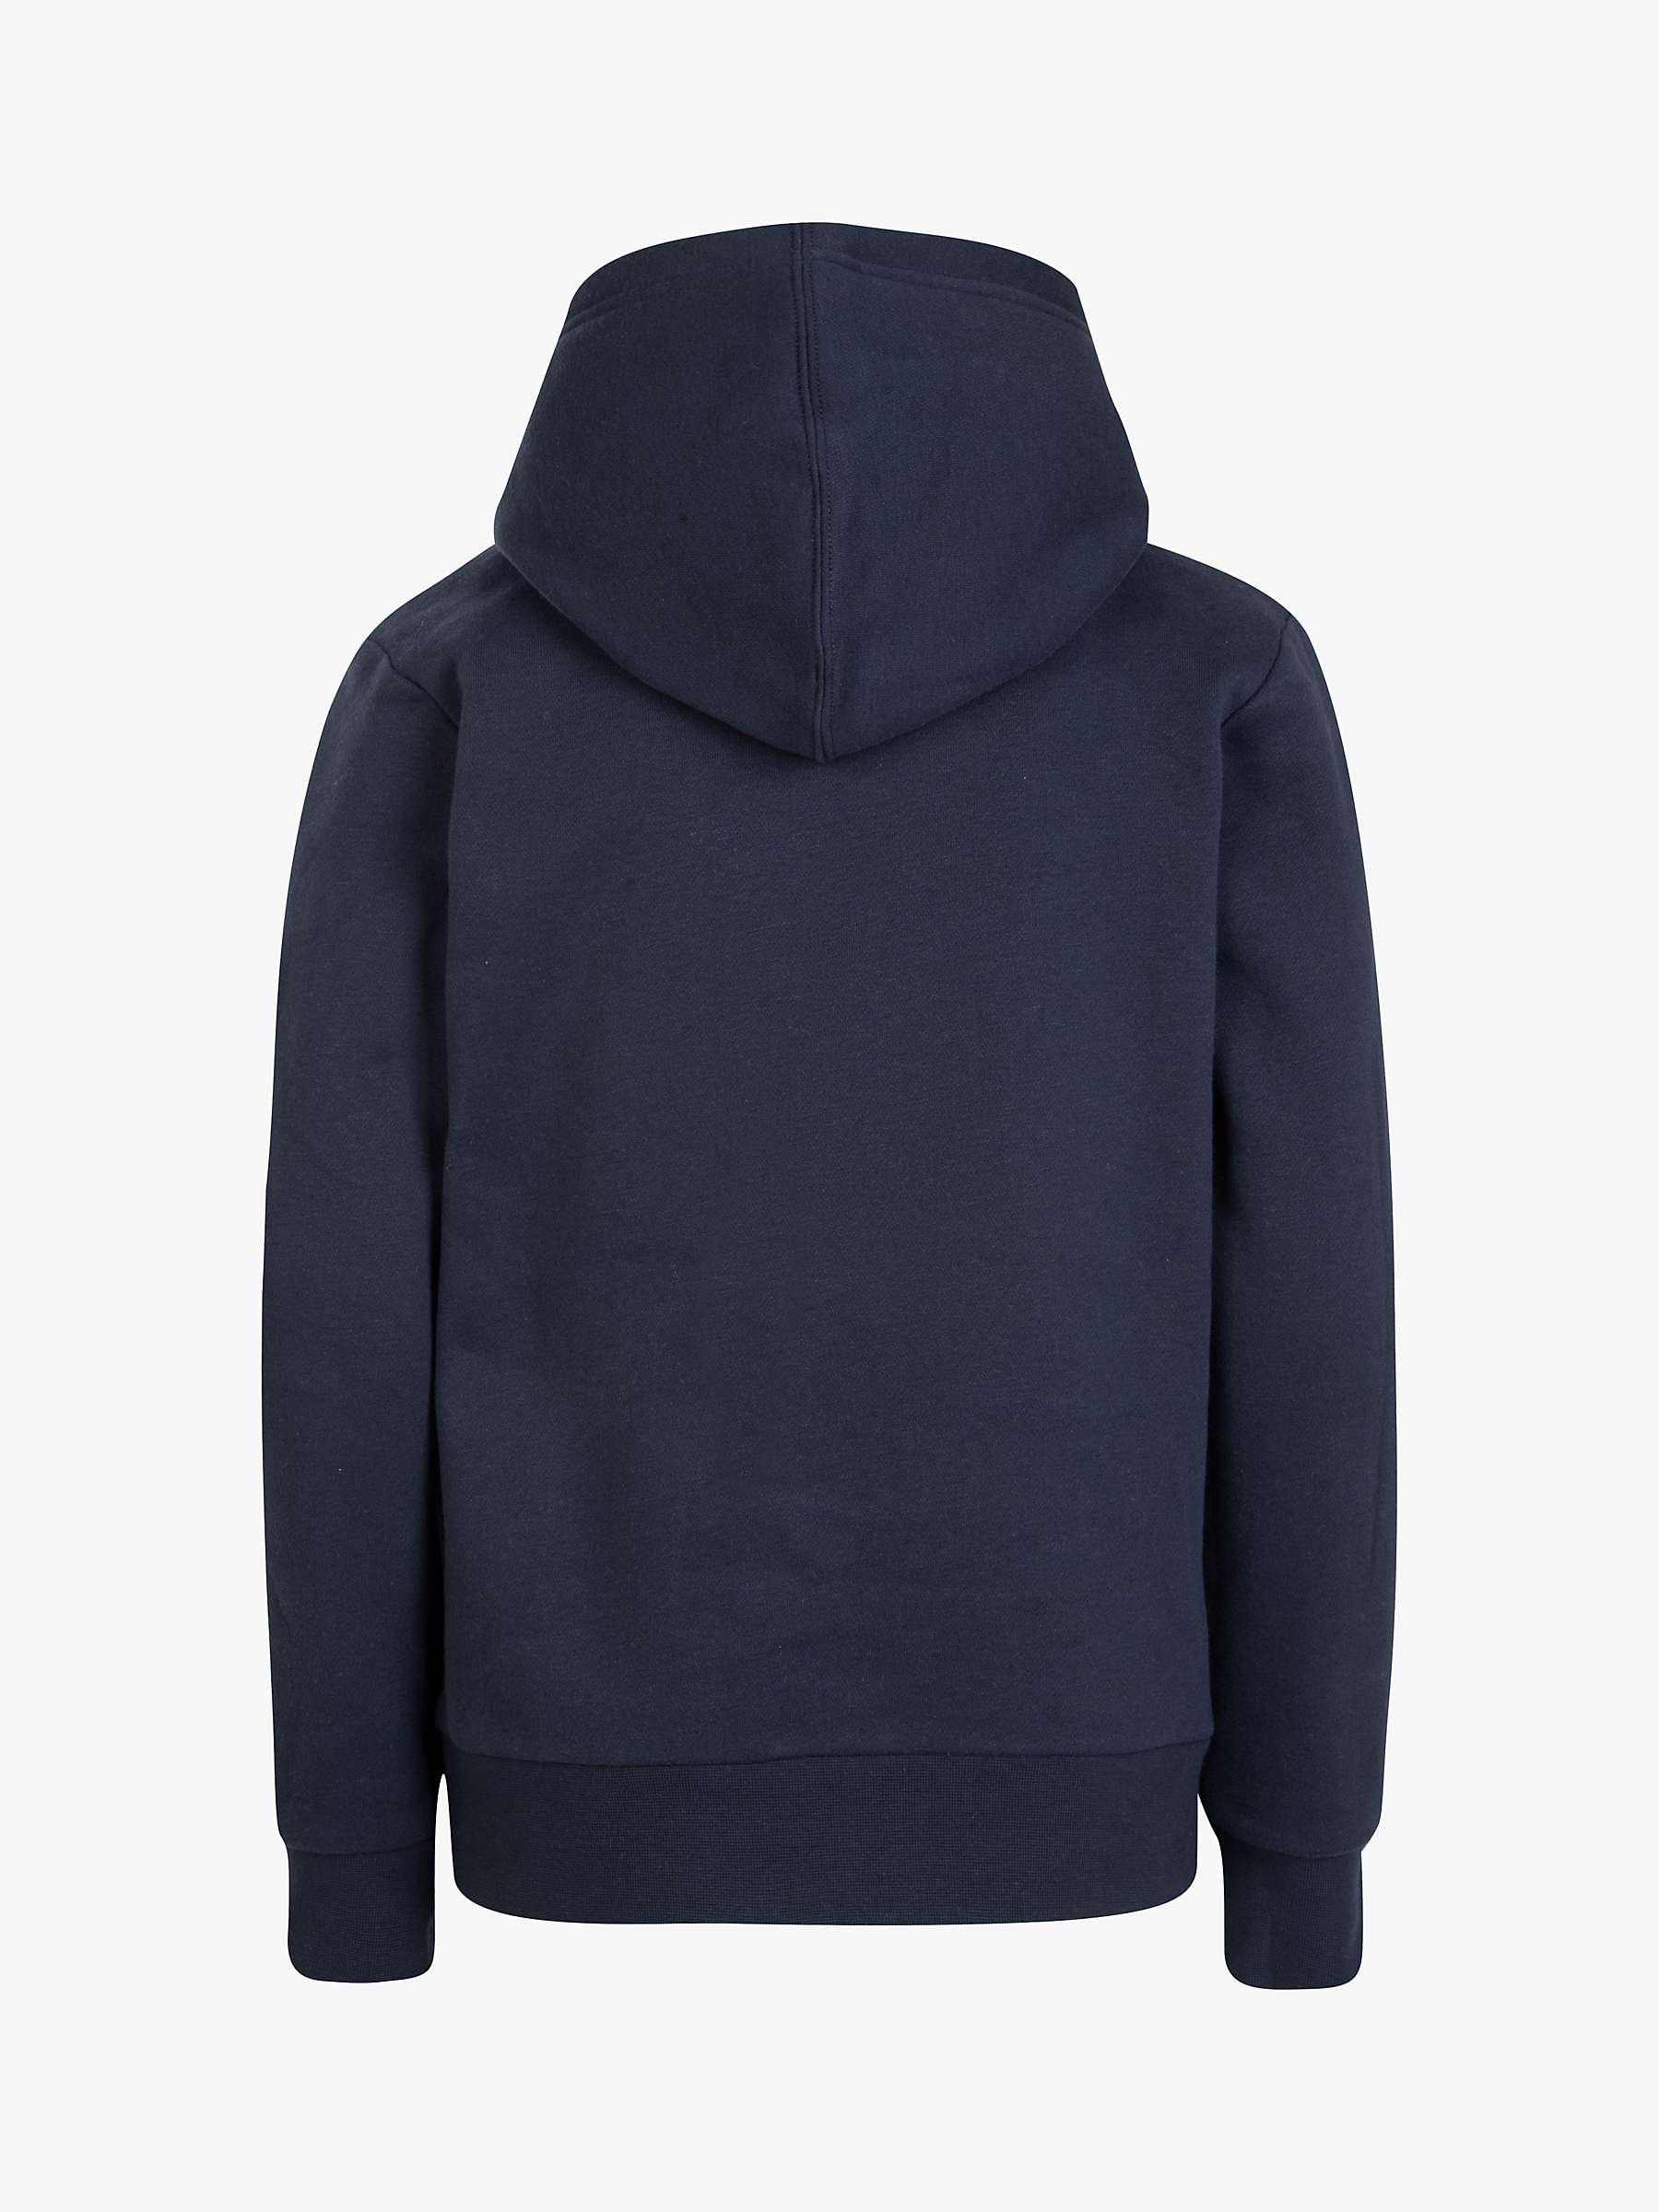 Buy Converse Kids' Chuck Patch Hoodie Online at johnlewis.com